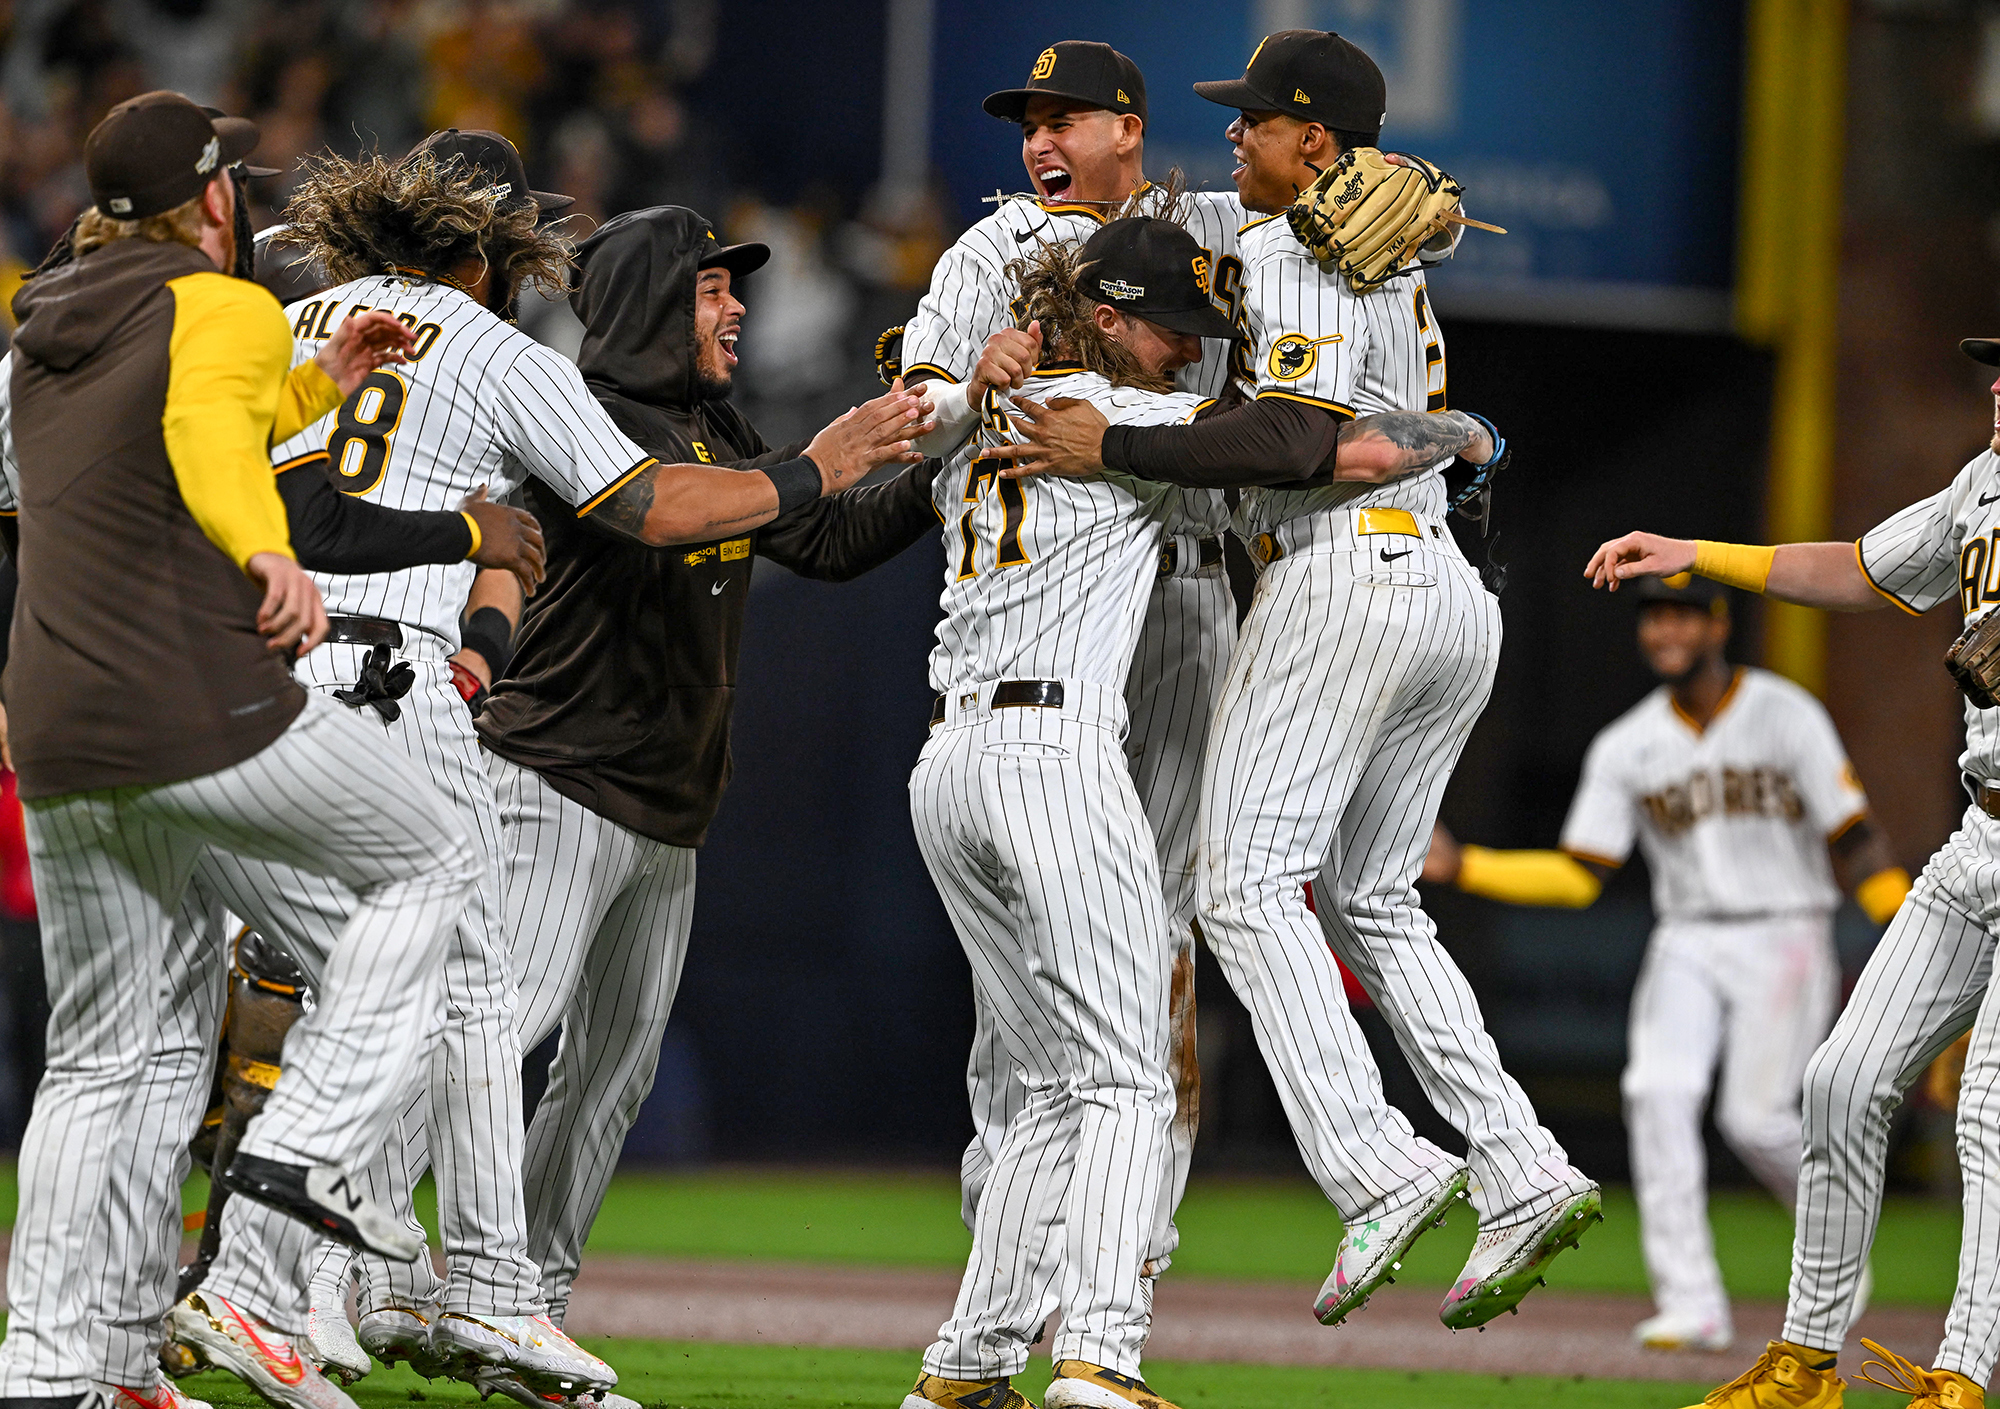 Padres players celebrate a playoff series win.